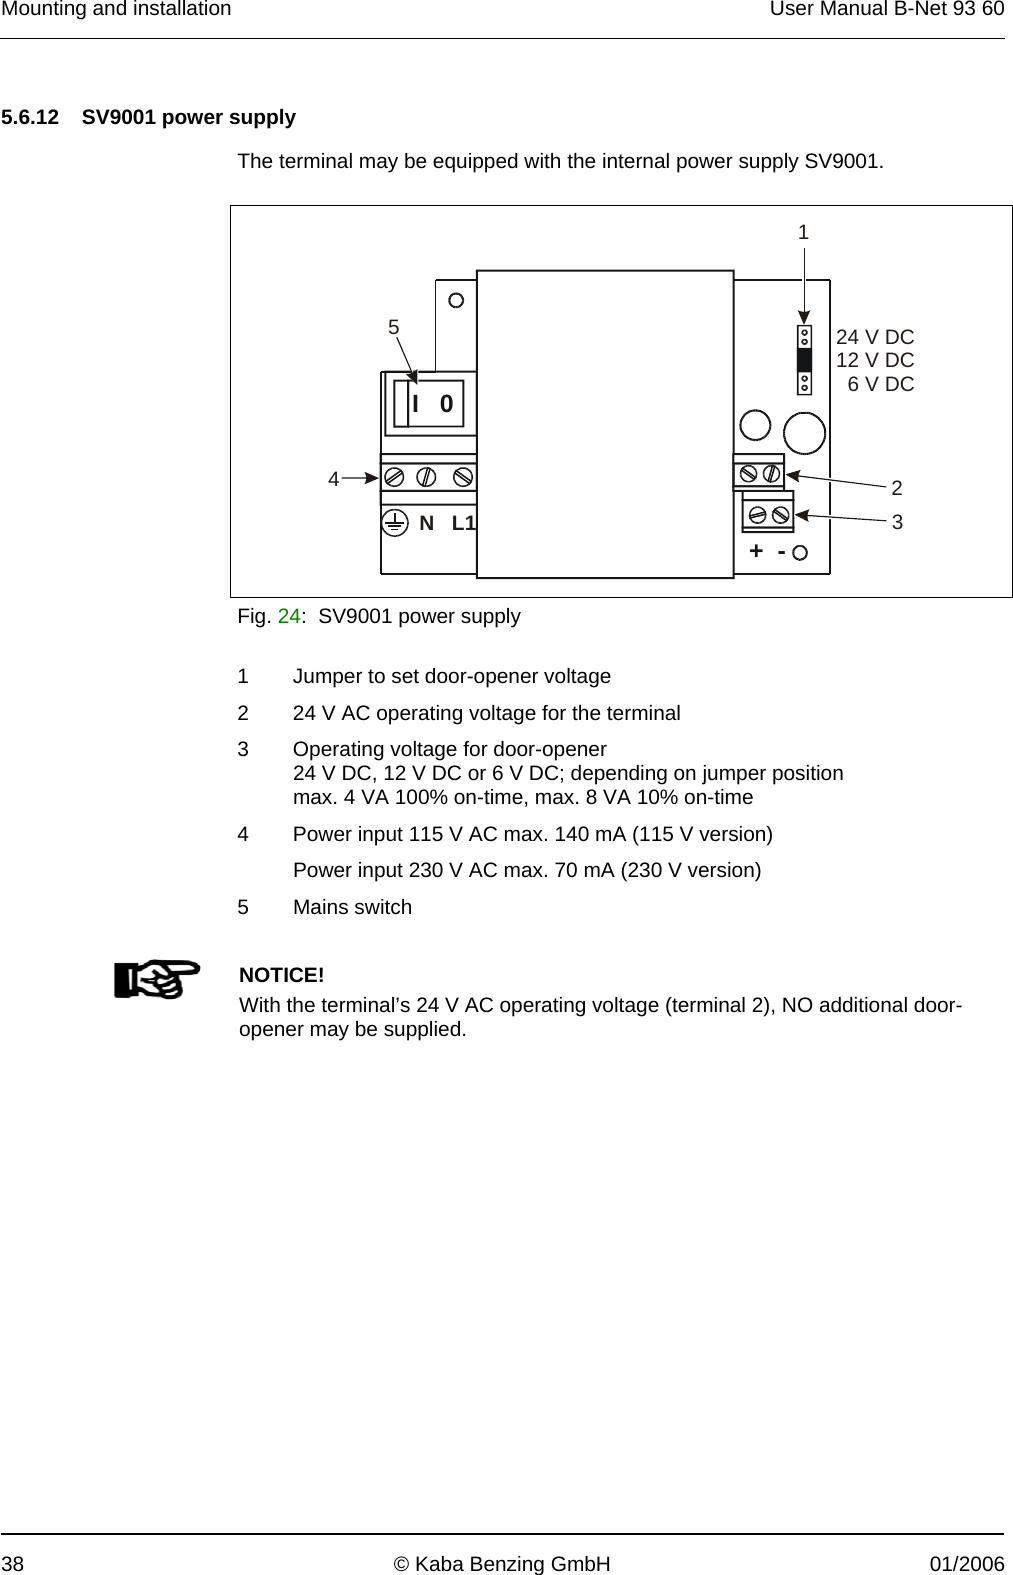 Mounting and installation  User Manual B-Net 93 60 38  © Kaba Benzing GmbH  01/2006   5.6.12   SV9001 power supply  The terminal may be equipped with the internal power supply SV9001.    +  - I   0   NL124 V DC12 V DC6 V DC12345 Fig. 24:  SV9001 power supply  1  Jumper to set door-opener voltage 2  24 V AC operating voltage for the terminal 3  Operating voltage for door-opener 24 V DC, 12 V DC or 6 V DC; depending on jumper position max. 4 VA 100% on-time, max. 8 VA 10% on-time 4  Power input 115 V AC max. 140 mA (115 V version) Power input 230 V AC max. 70 mA (230 V version) 5 Mains switch        NOTICE! With the terminal’s 24 V AC operating voltage (terminal 2), NO additional door-opener may be supplied.  